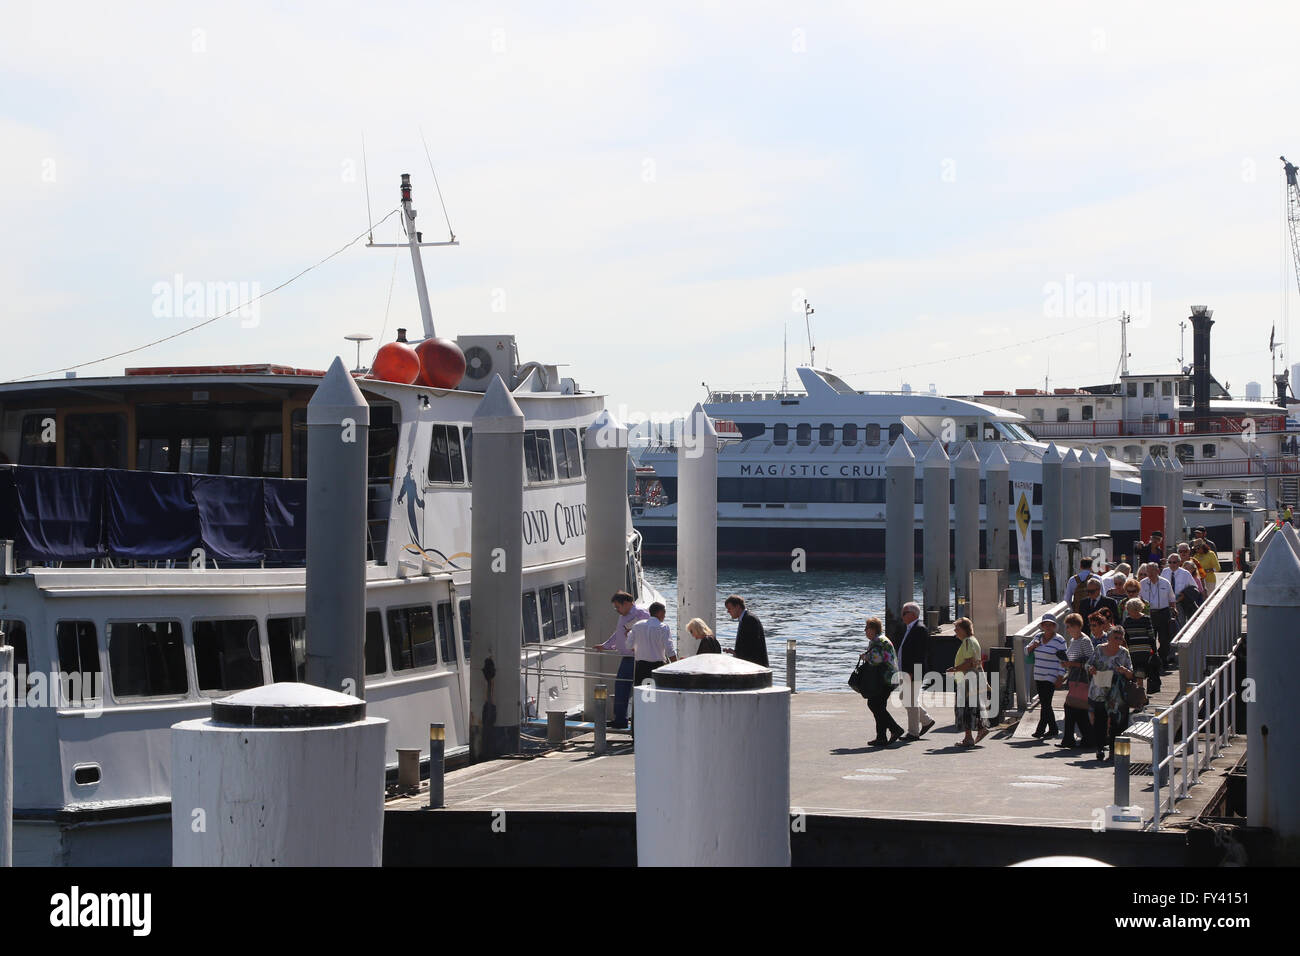 Sydney, Australia. 21 April 2016. The Australian Monarchist League organised a celebratory luncheon cruise in honour of Queen Elizabeth II’s 90th birthday, which takes place on the same day. The cruise departed Kings Street Wharf, Darling Harbour onboard Vagabond. Credit: Richard Milnes/Alamy Live News Stock Photo